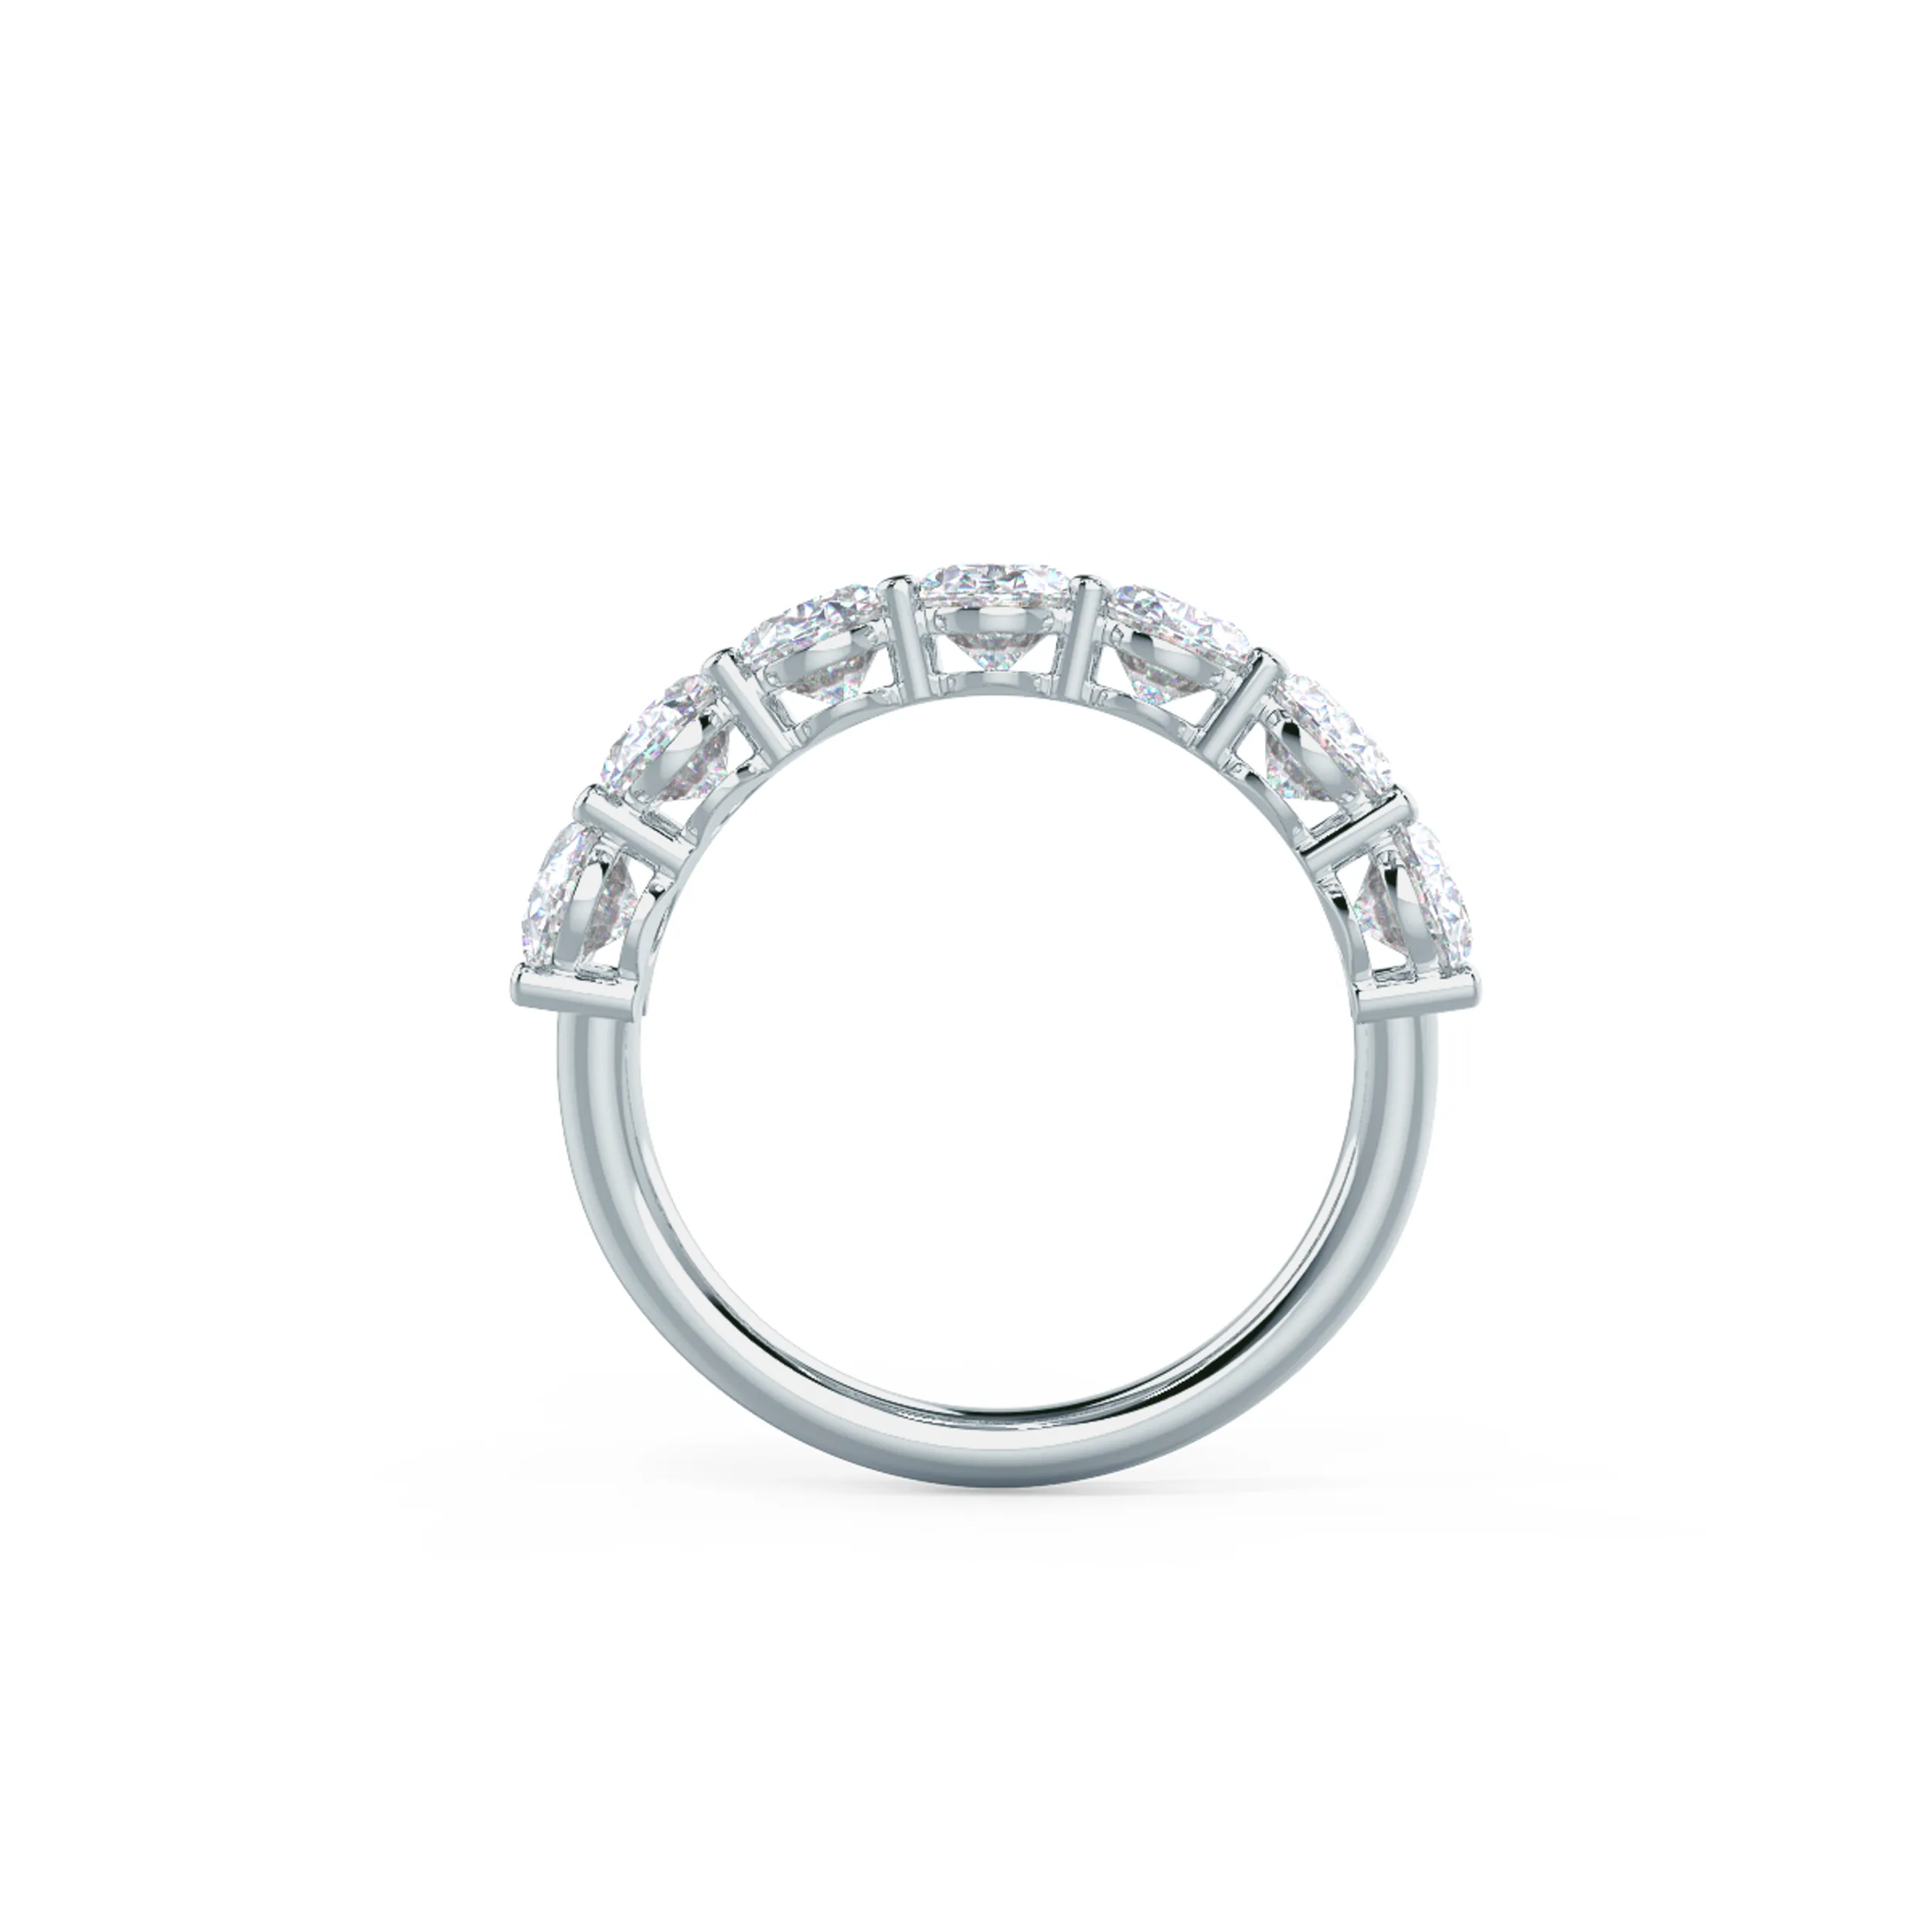 18k White Gold Oval Basket Seven Stone featuring High Quality 2.8 ct Lab Diamonds (Profile View)